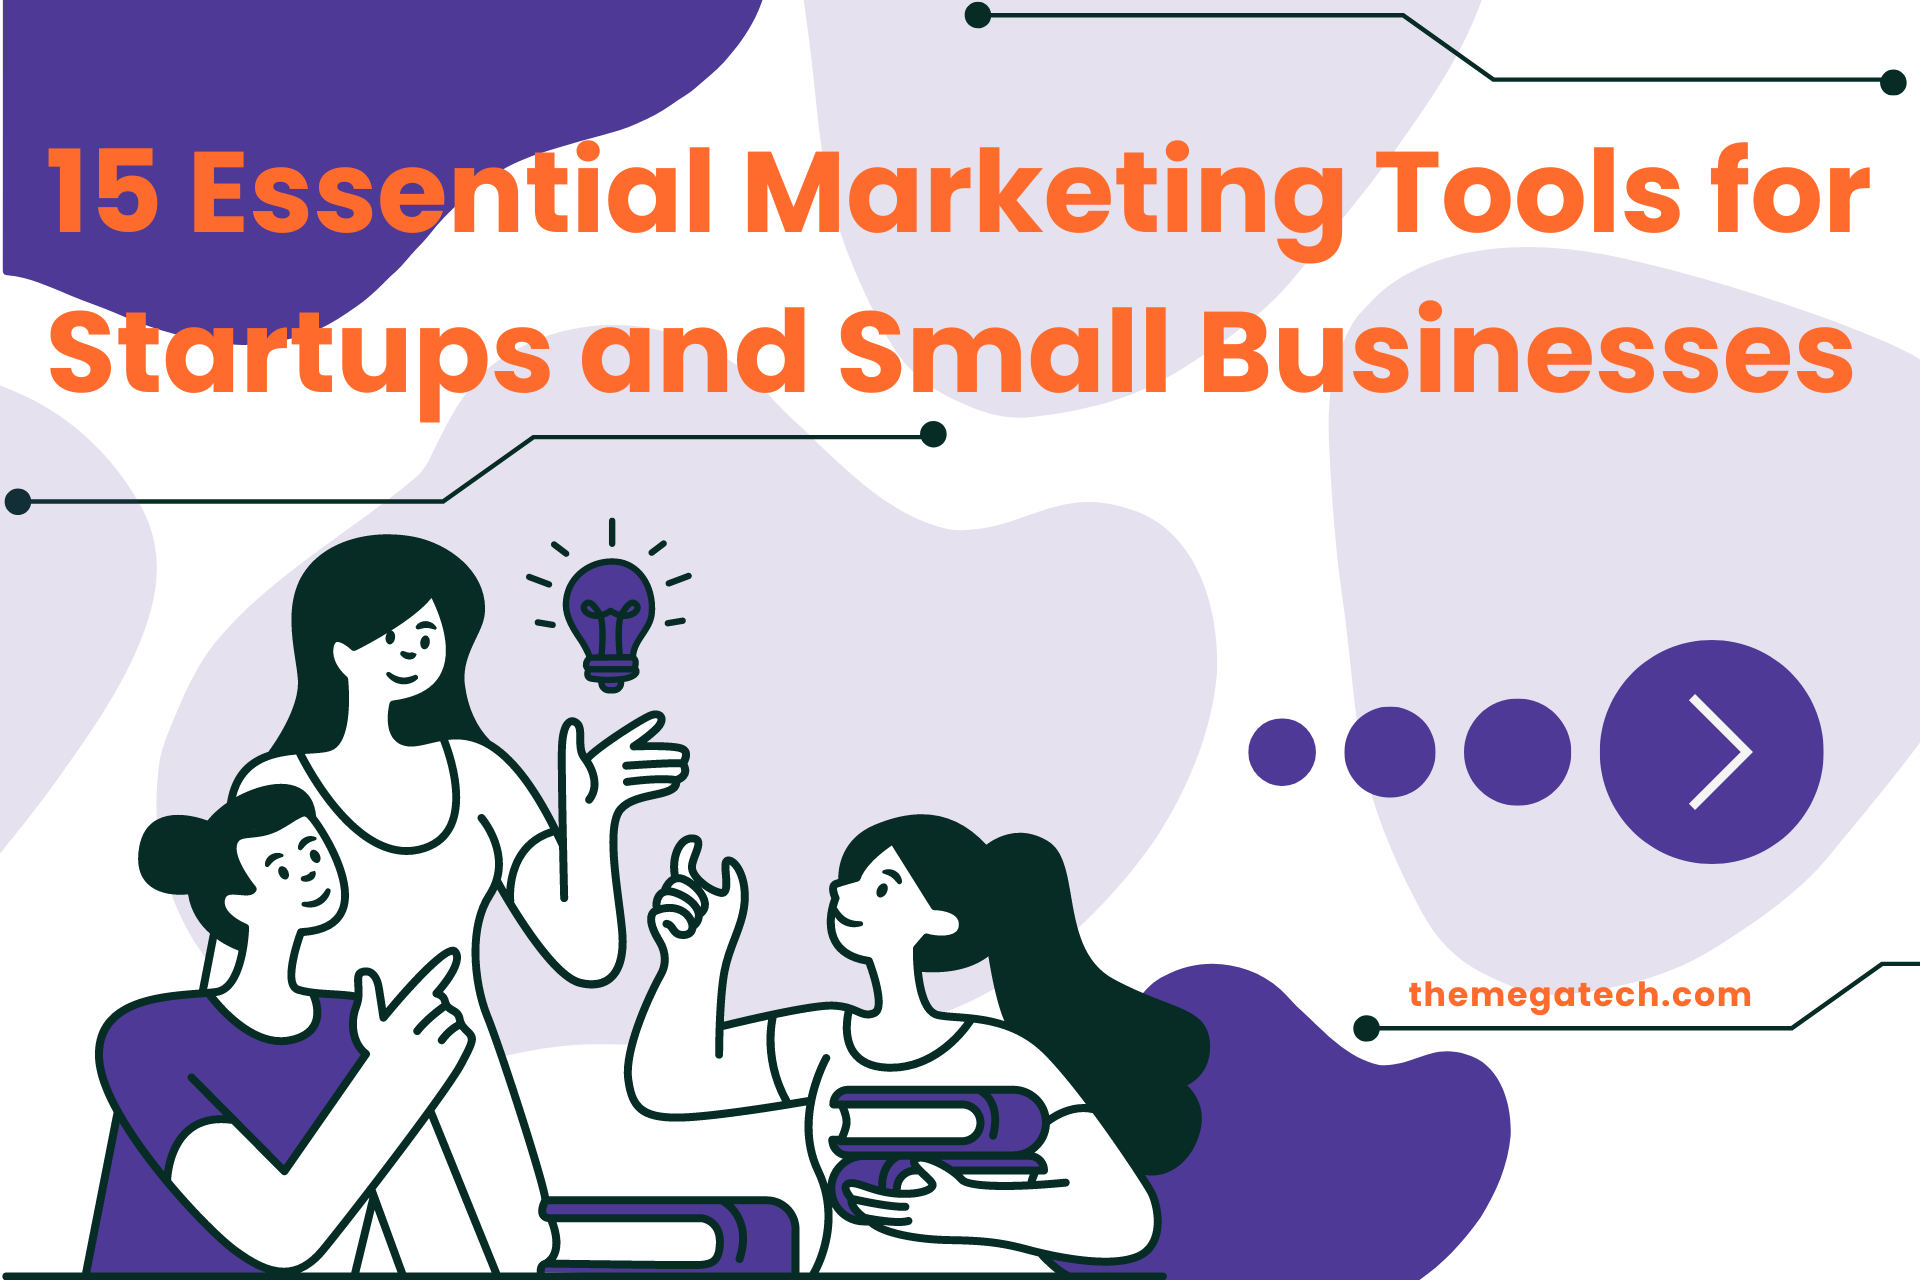 15 Essential Marketing Tools for Startups and Small Businesses - A Guide by The Megatech